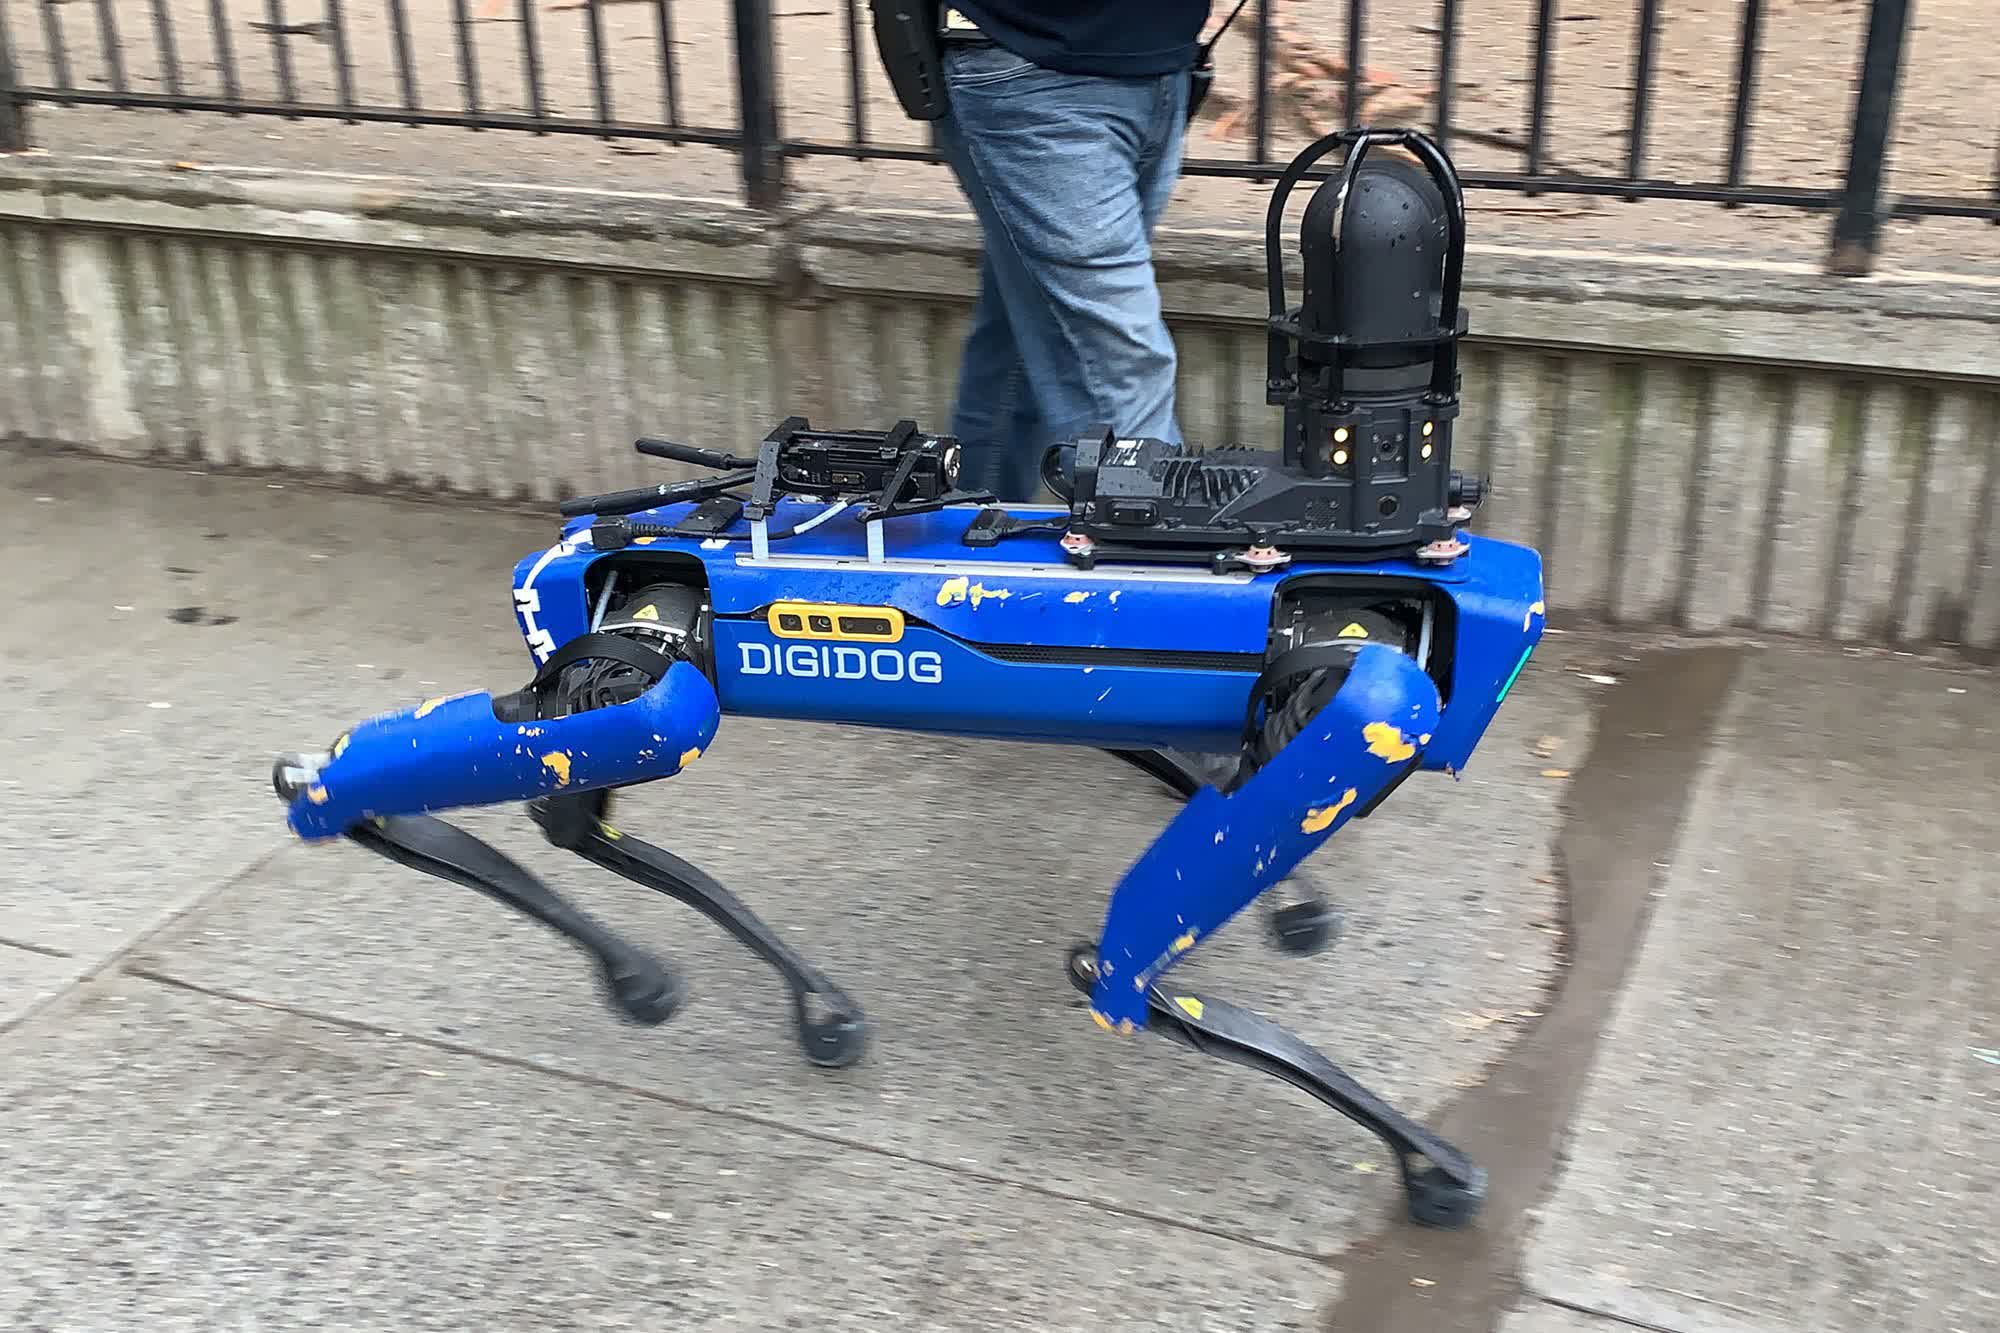 NYPD rips up $94,000 'Digidog' contract with Boston Dynamics after backlash from activists and city officials